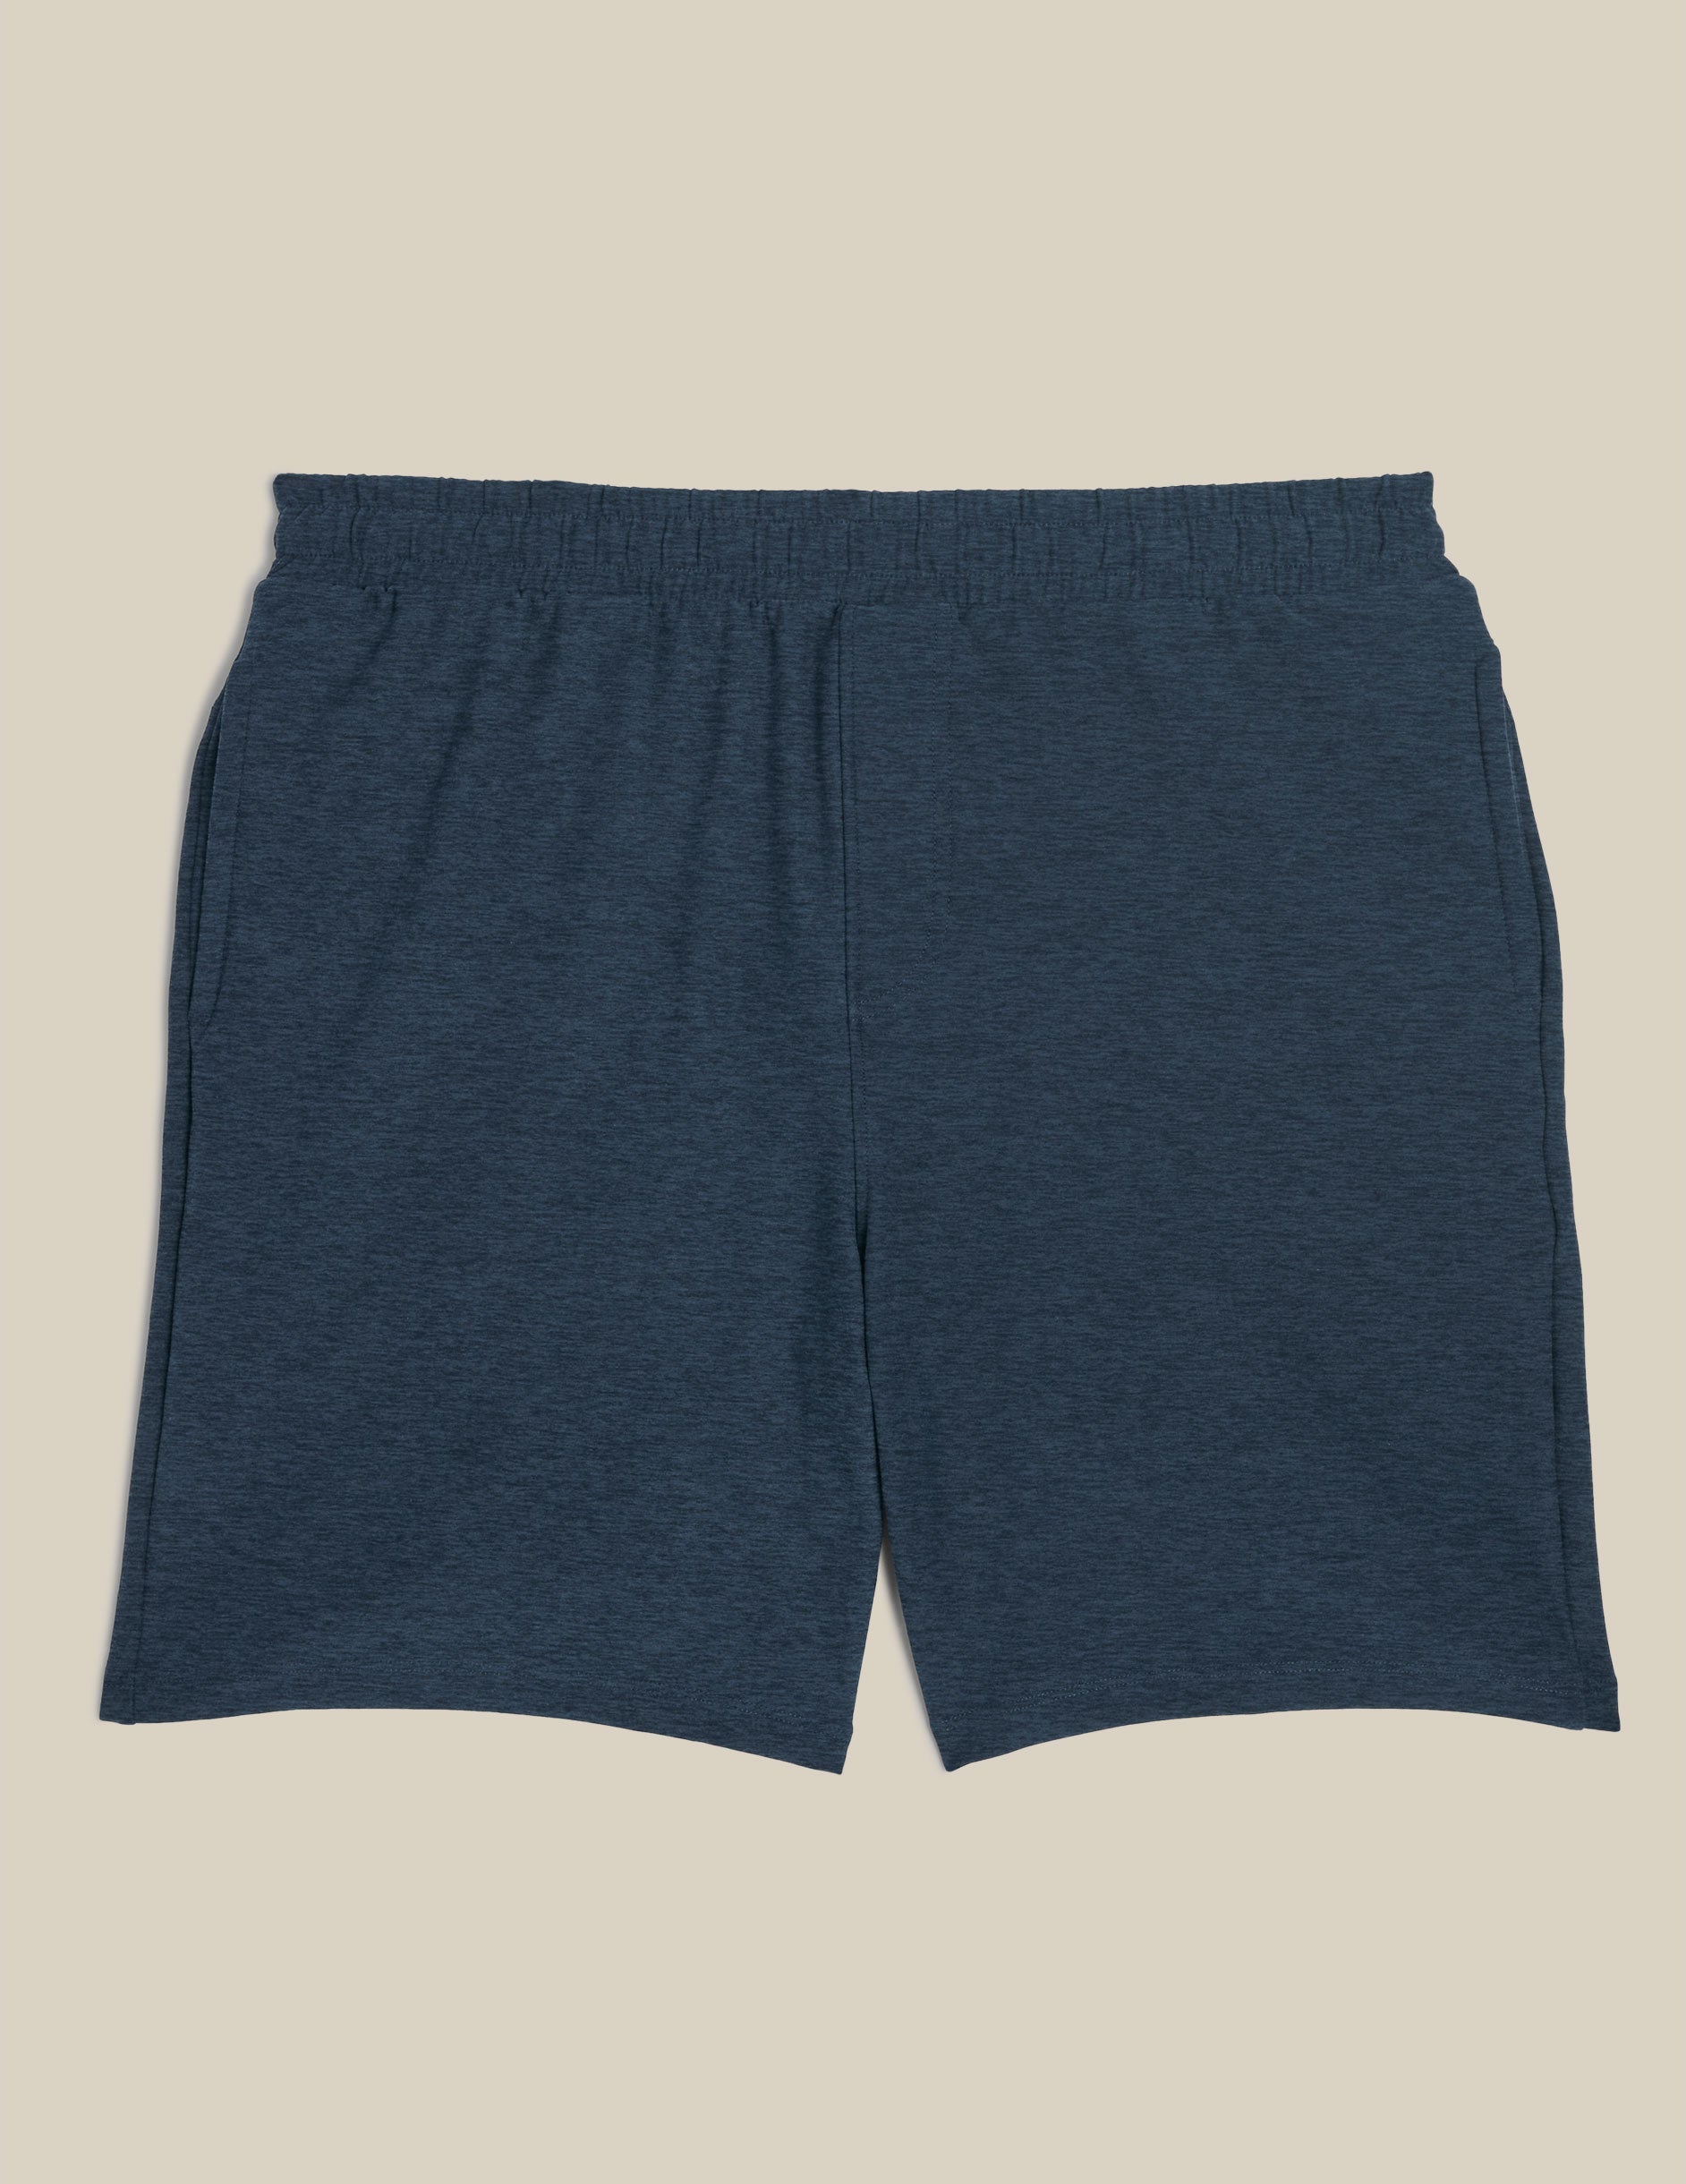 blue relaxed fit men's athleisure shorts with pockets.